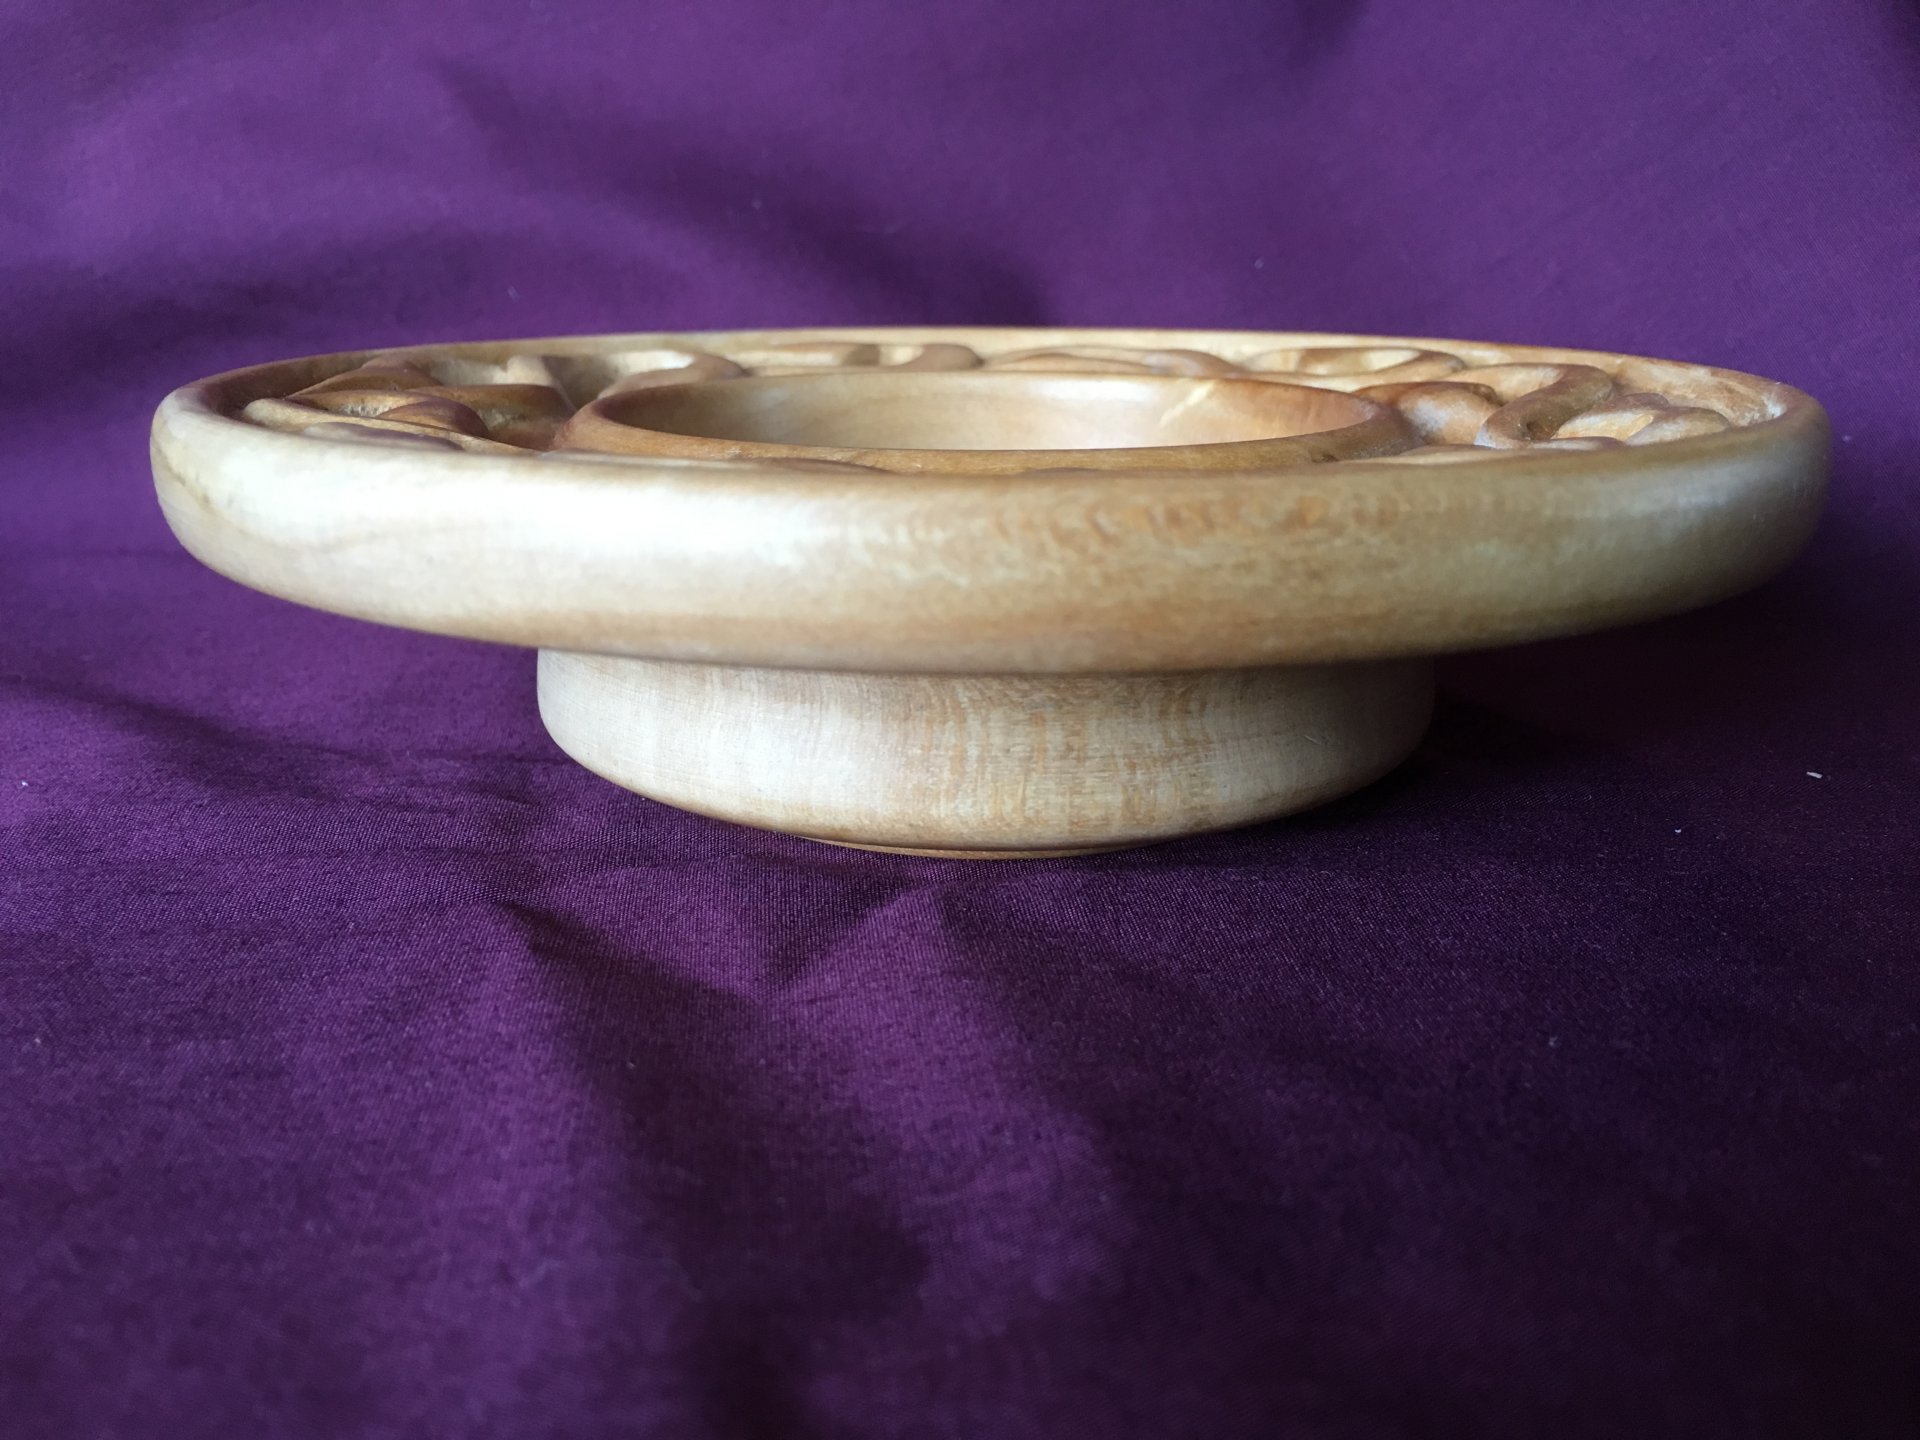 vined bowl, side view